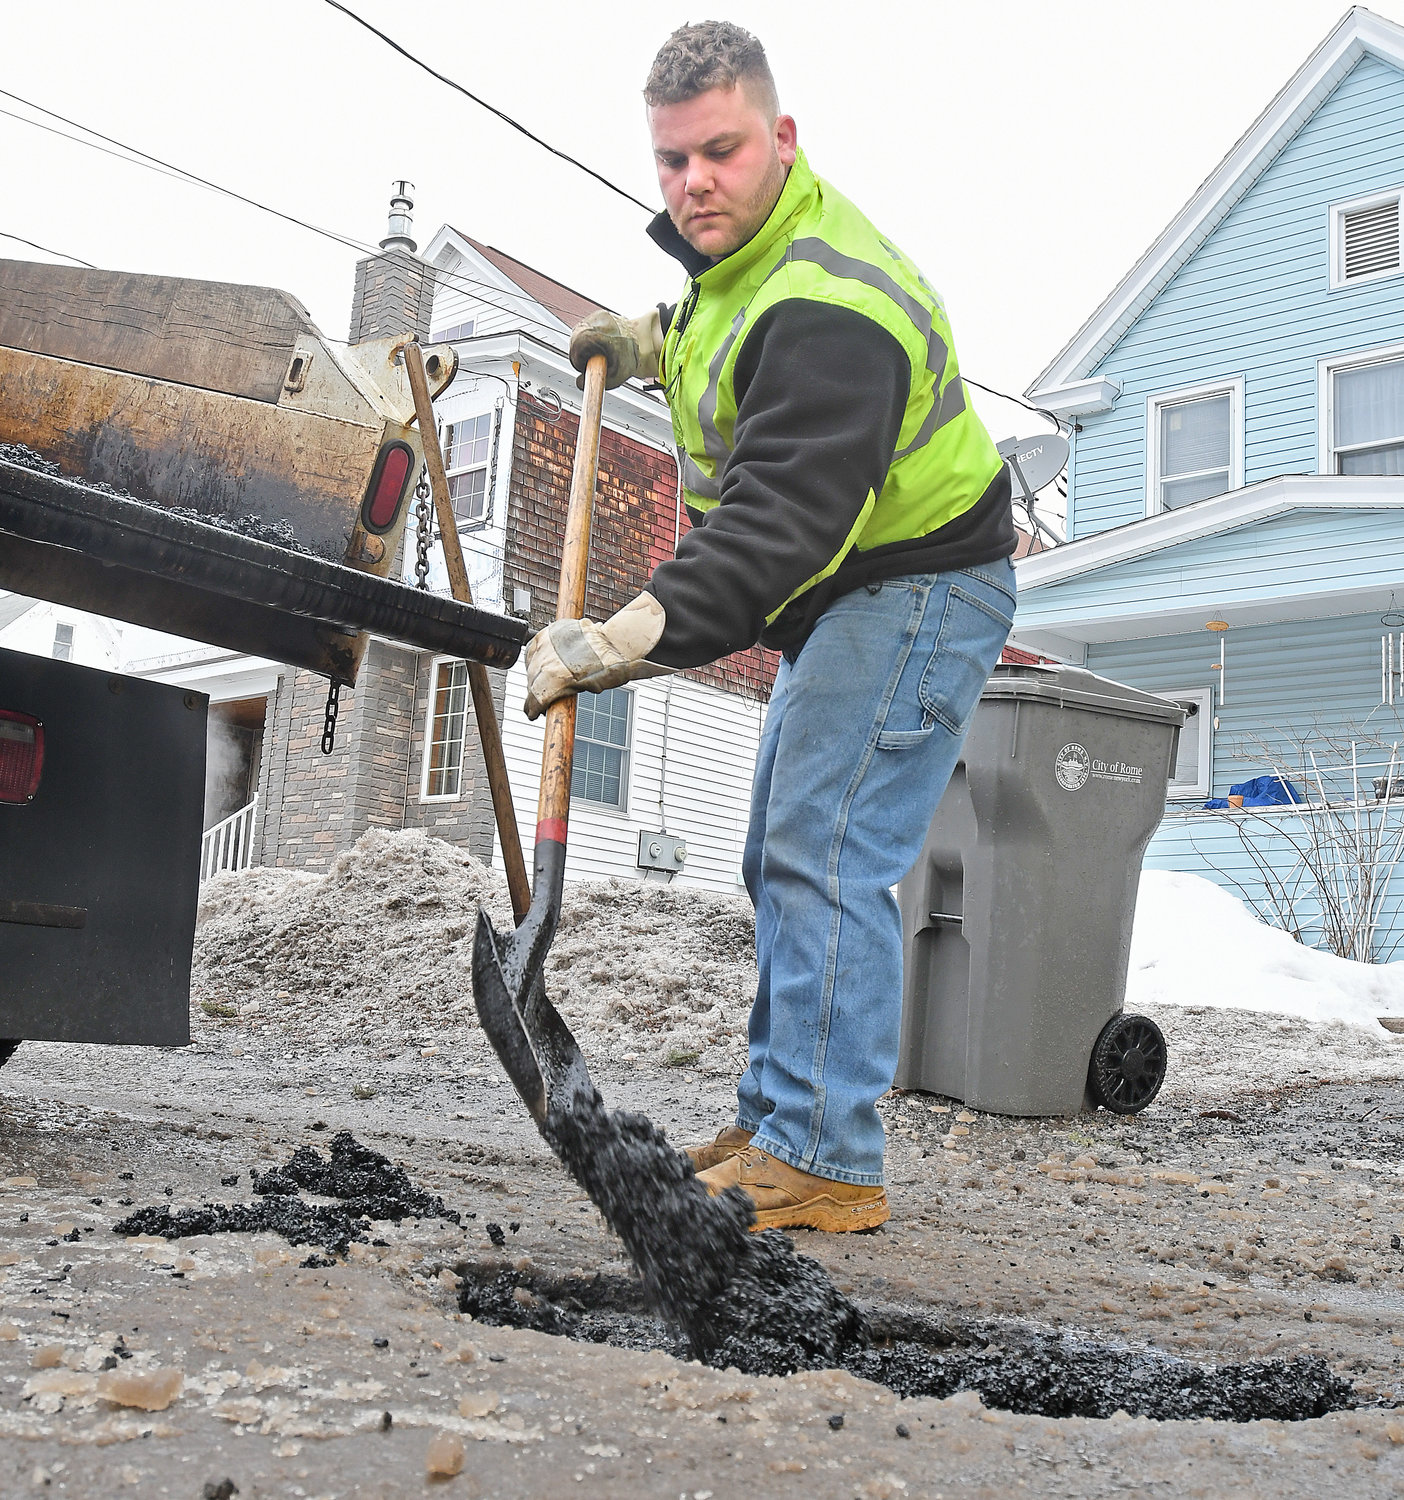 POTHOLE SEASON — DPW is taking advantage of the mild weather, as city worker Andrew DeBlasiis fills in a pothole on William Street with cold patch this morning. Residents can report potholes and other non-emergency issues to City Hall by downloading the RomeNY 311 app, available on iOS and Android devices, and following the onscreen instructions. This winter — with its fluctuating temperatures and mixed precipitation — has been ideal for  spawning potholes, which are often created when the precipitation leaks through cracks in streets and roadways and pools under the pavement and then expands as it freezes when temperatures drop.